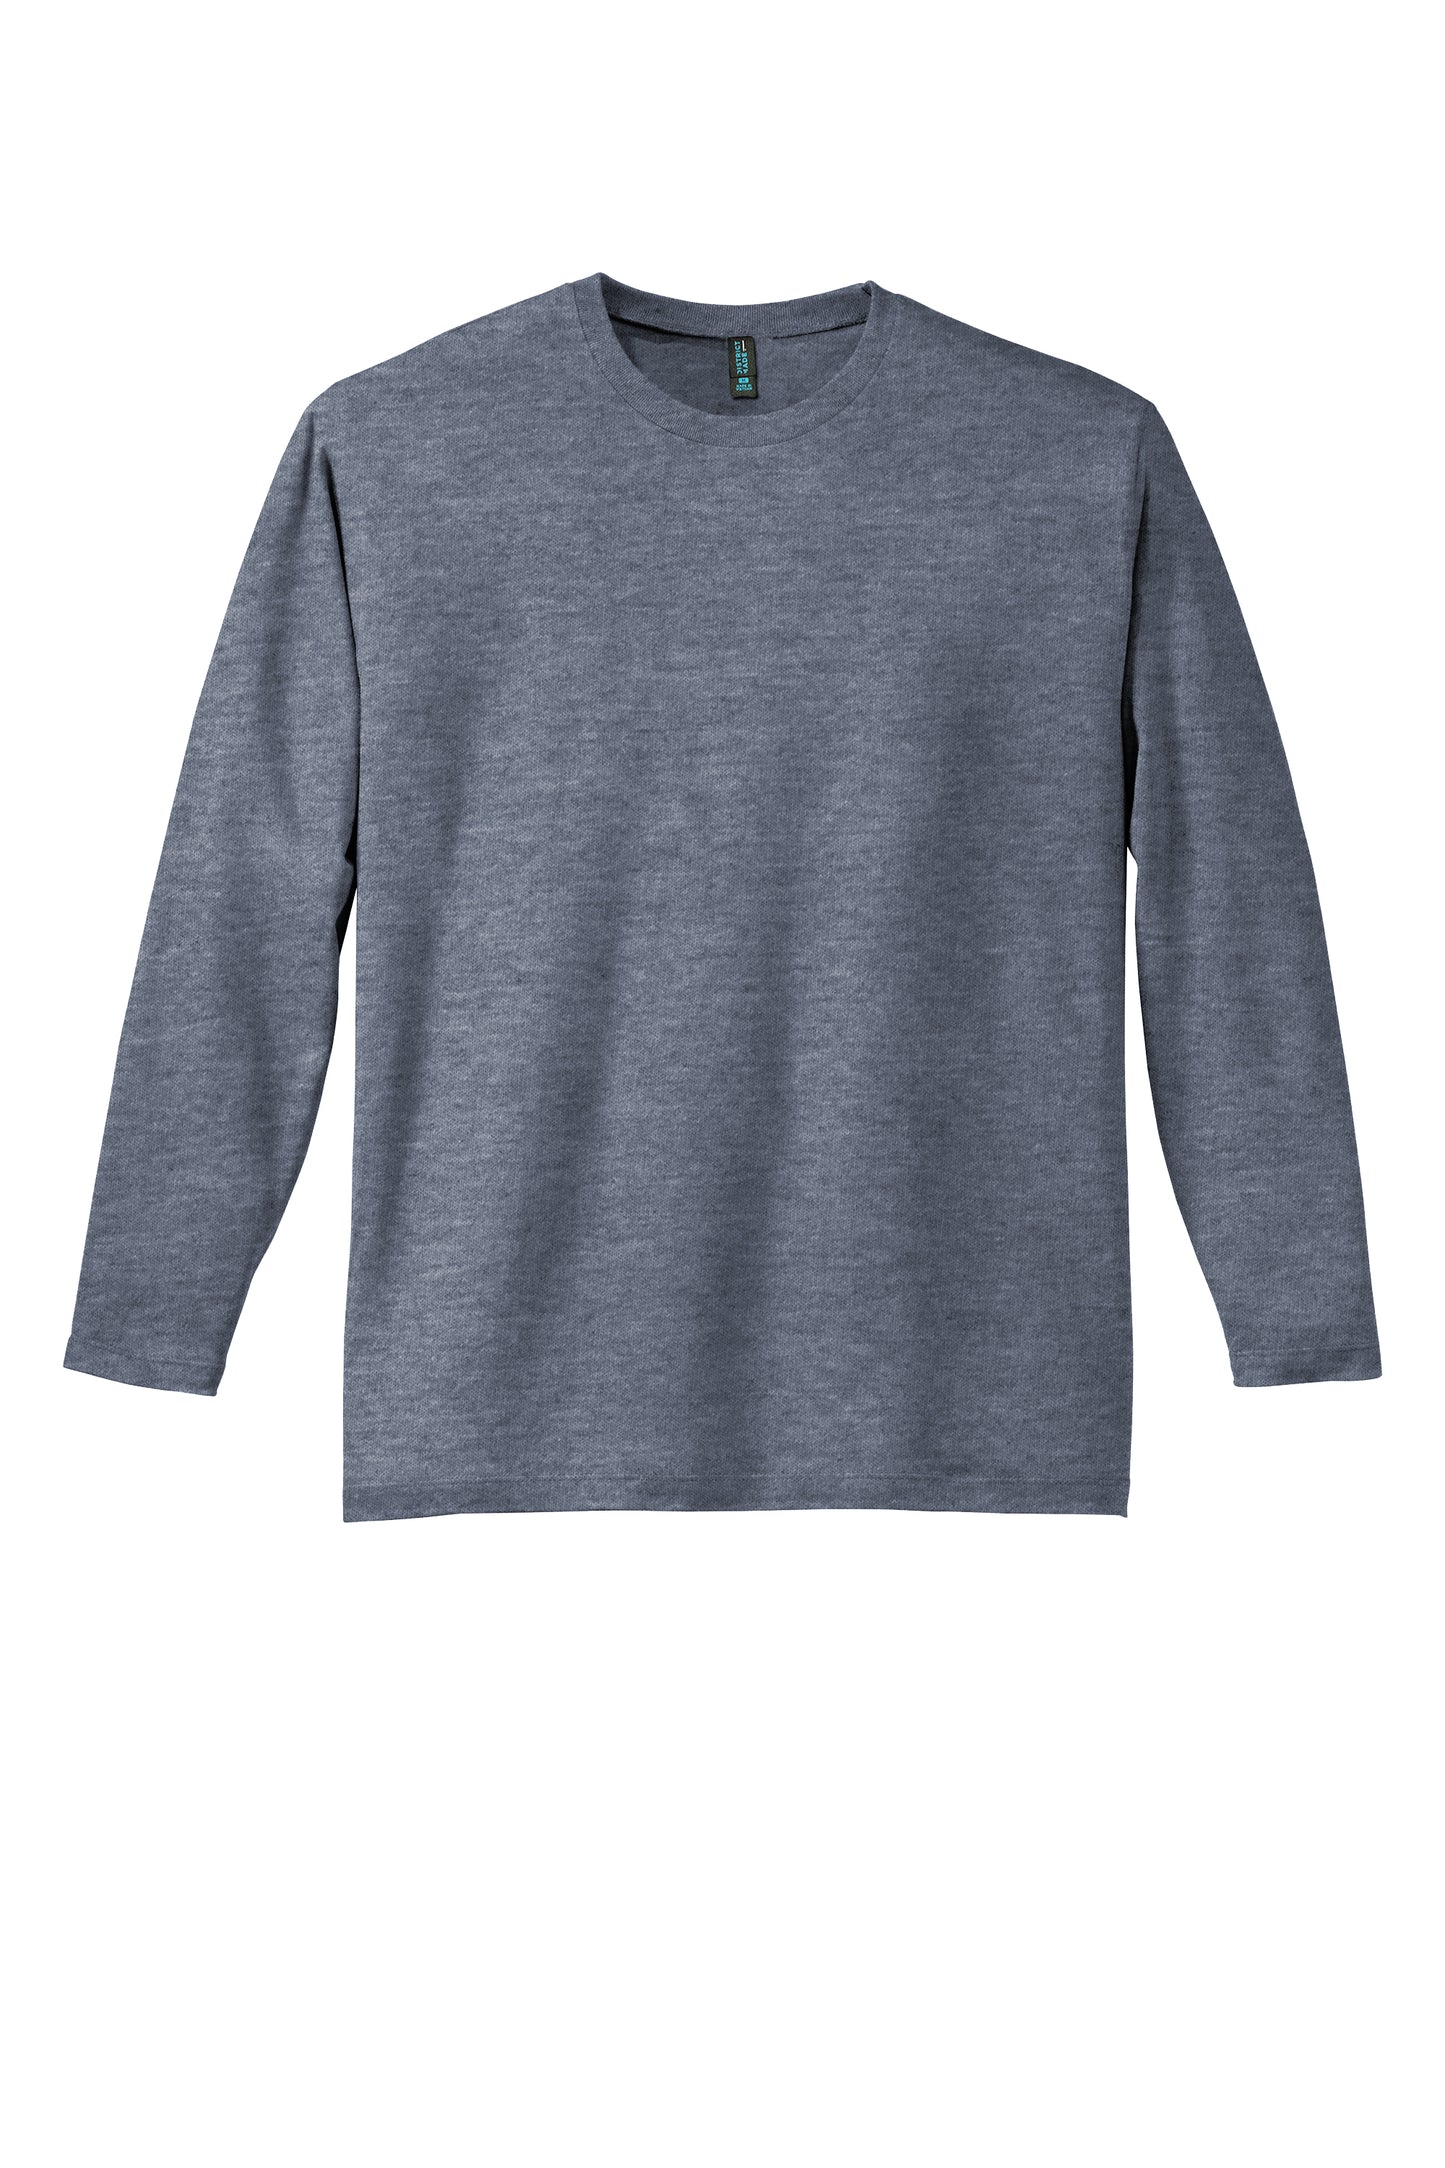 District Perfect Weight Long Sleeve Unisex Tee - Heathered Navy